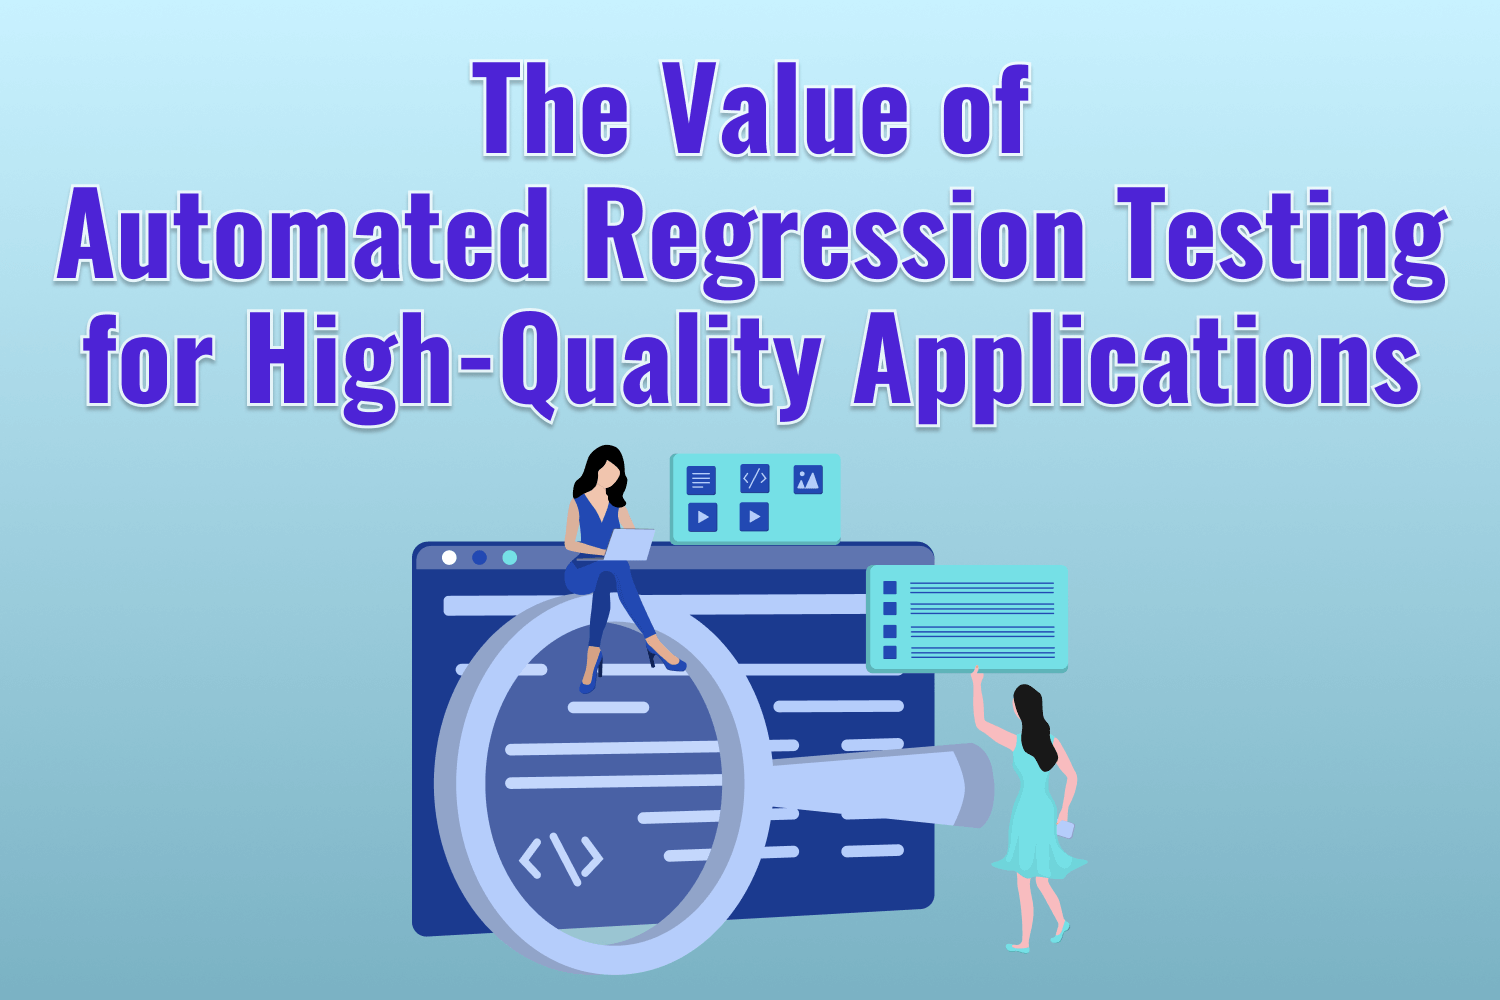 The Value of Automated Regression Testing for High-Quality Applications